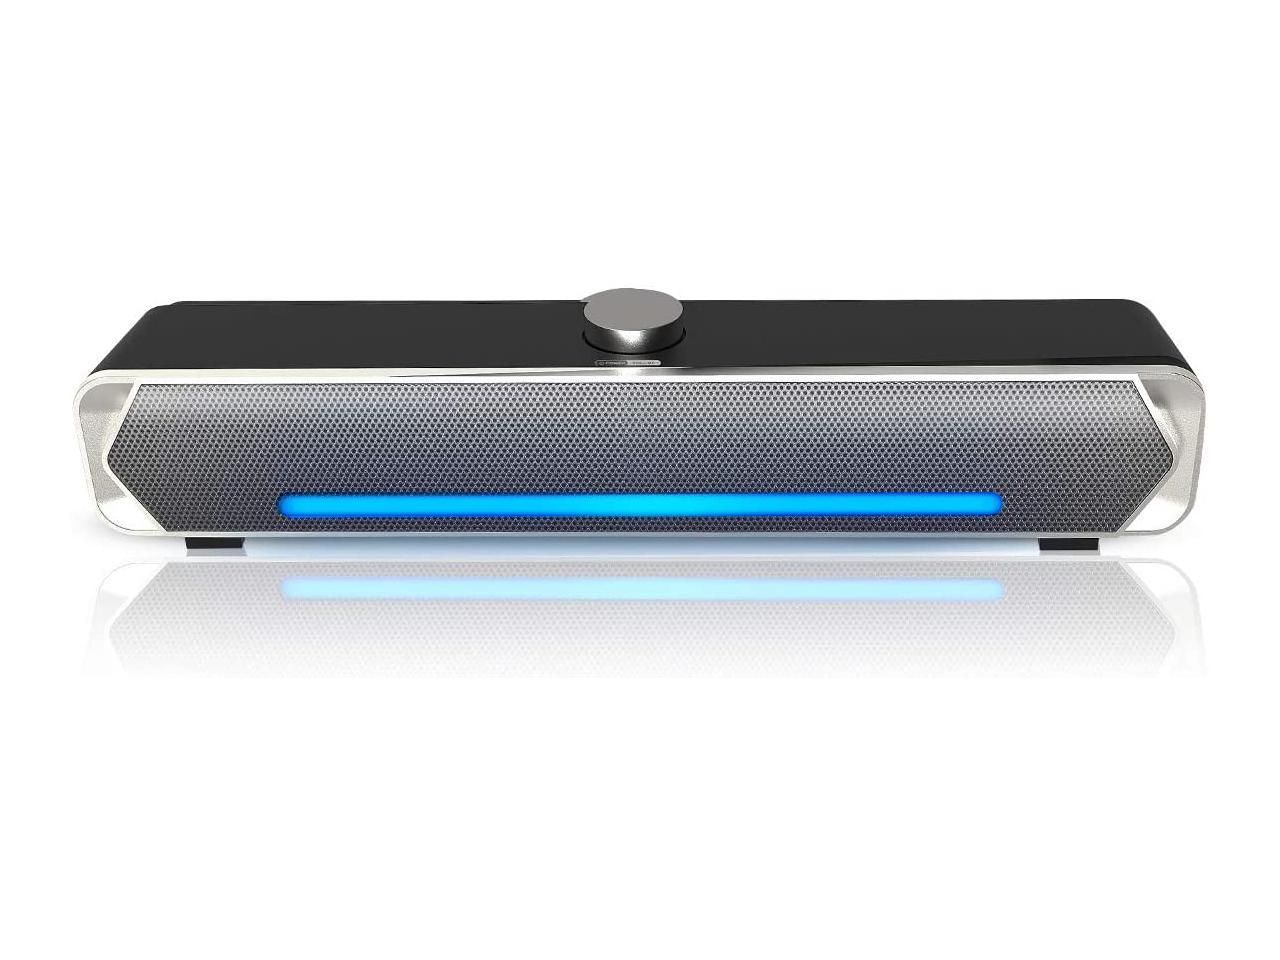 2.0 Stereo Sound USB Powered Laptop Speaker for Computer Cellphone and More Desktop Pad Mac 2021 Version PC Wired Desktop Sound Bar with LED Lights Computer Speakers 